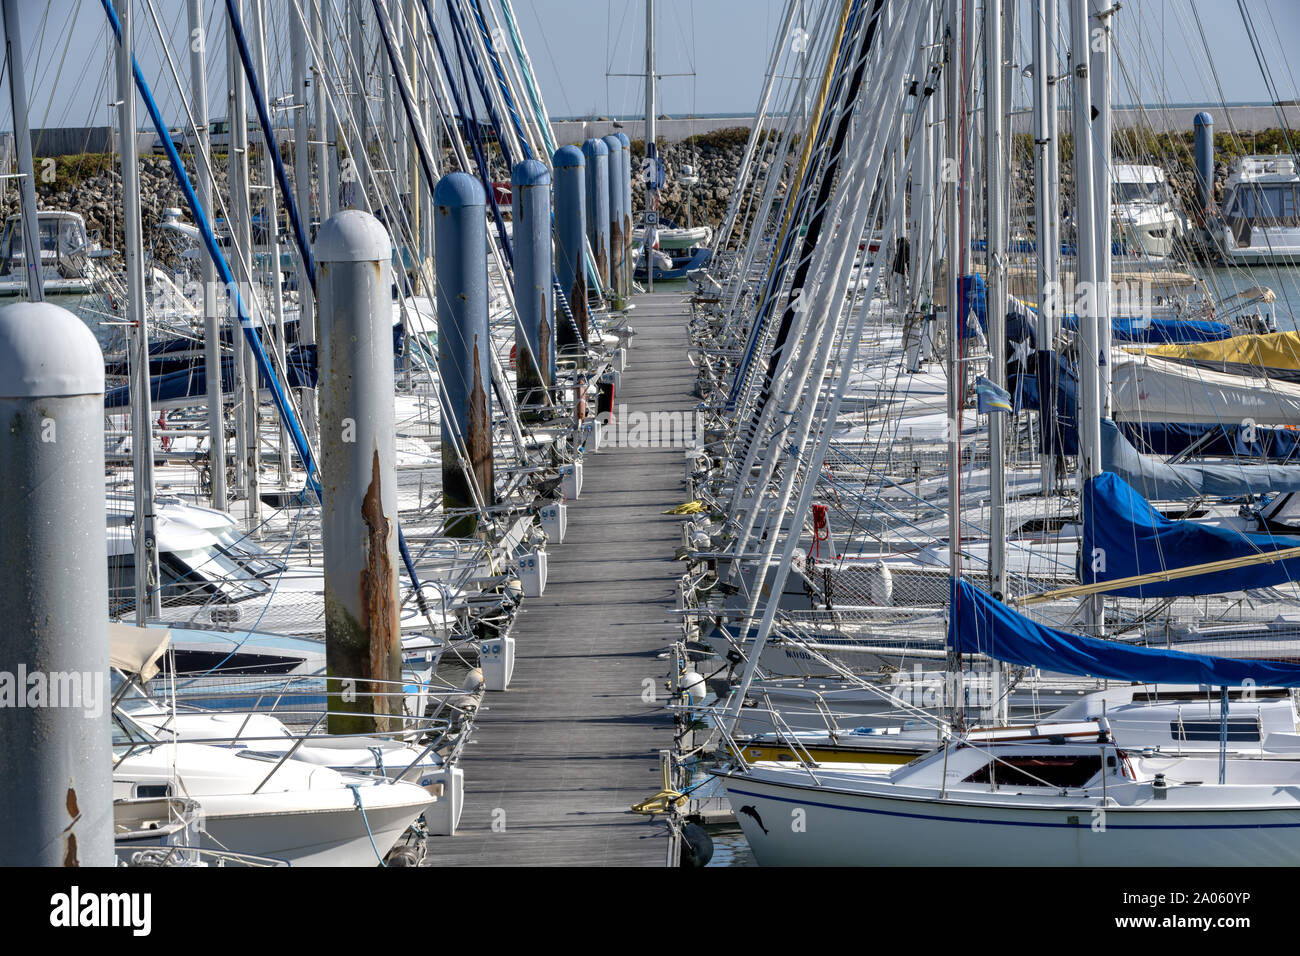 France, Île d'Oléron, 10/2018 , popular tourist destination, Pier or port for sailing boats and yachts.,  is an island off the Atlantic coast of Franc Stock Photo